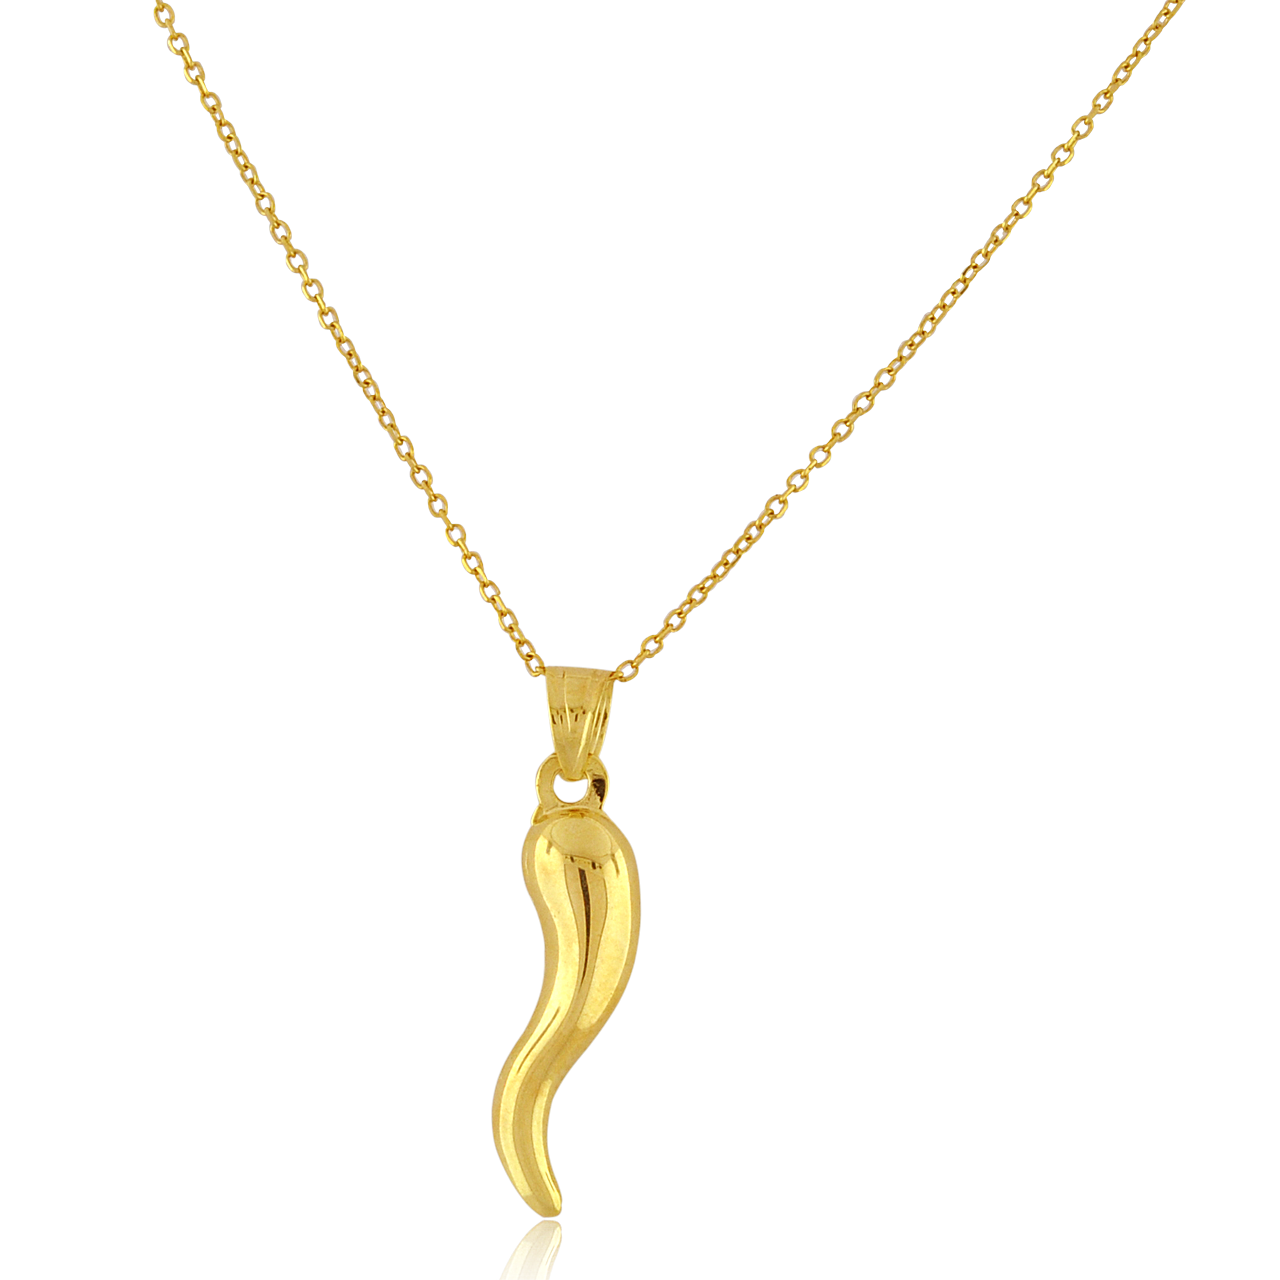 U7 Gold Italian Horn Necklace Amulet Protection Charm Pepper Pendant Italian  Chili Horn Cornicello Necklaces For Men Women - Necklace - AliExpress